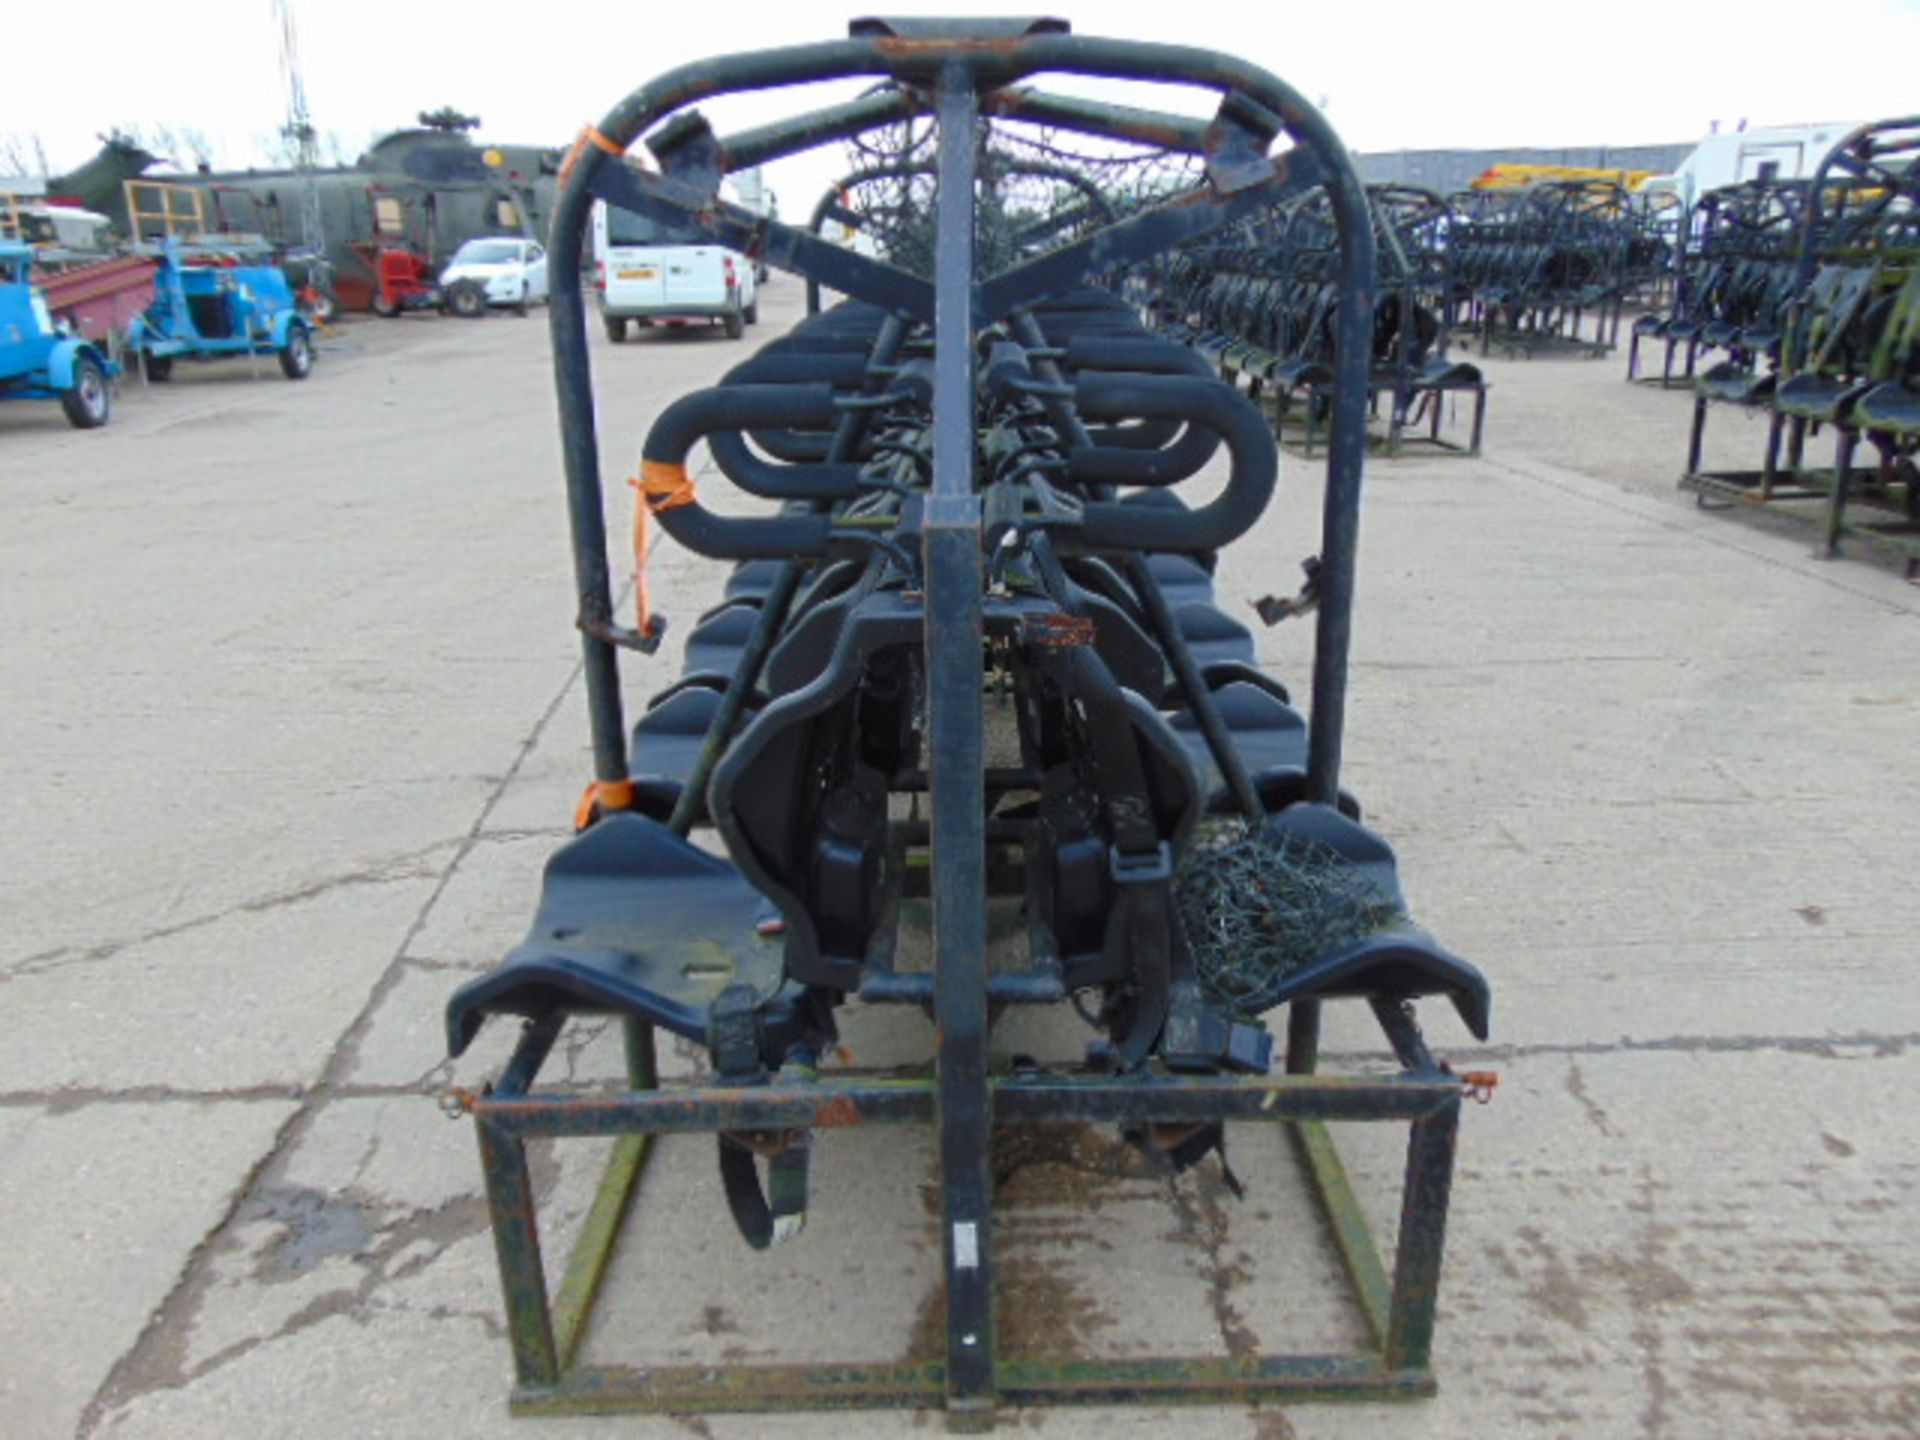 14 Man ROPS Security Seat suitable for Leyland Dafs, Bedfords etc - Image 3 of 5